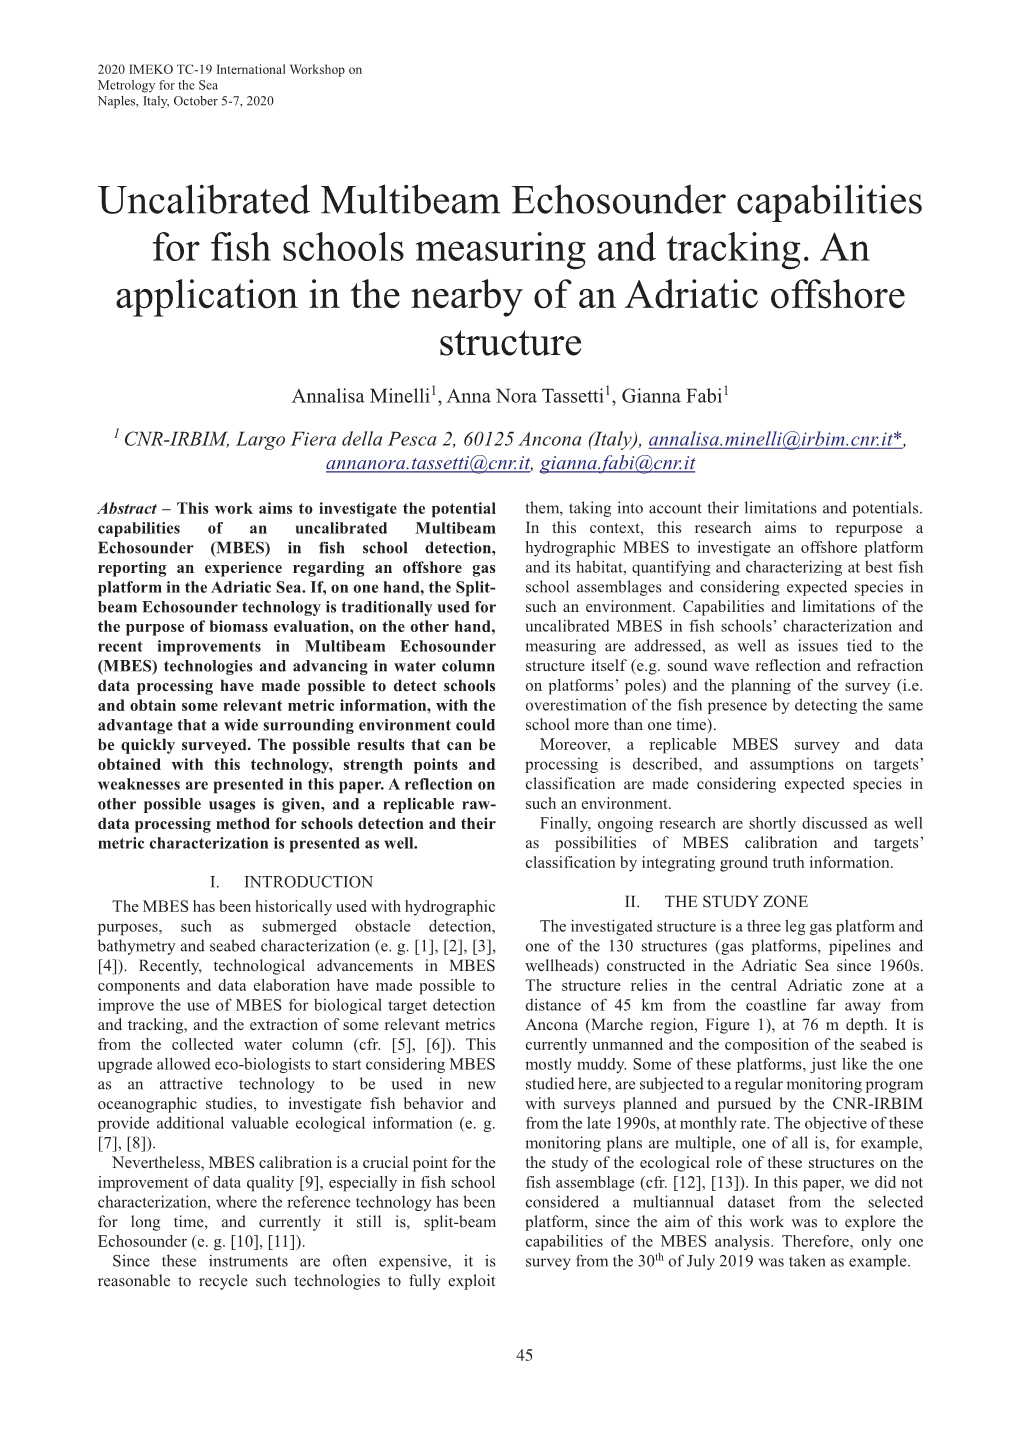 Uncalibrated Multibeam Echosounder Capabilities for Fish Schools Measuring and Tracking